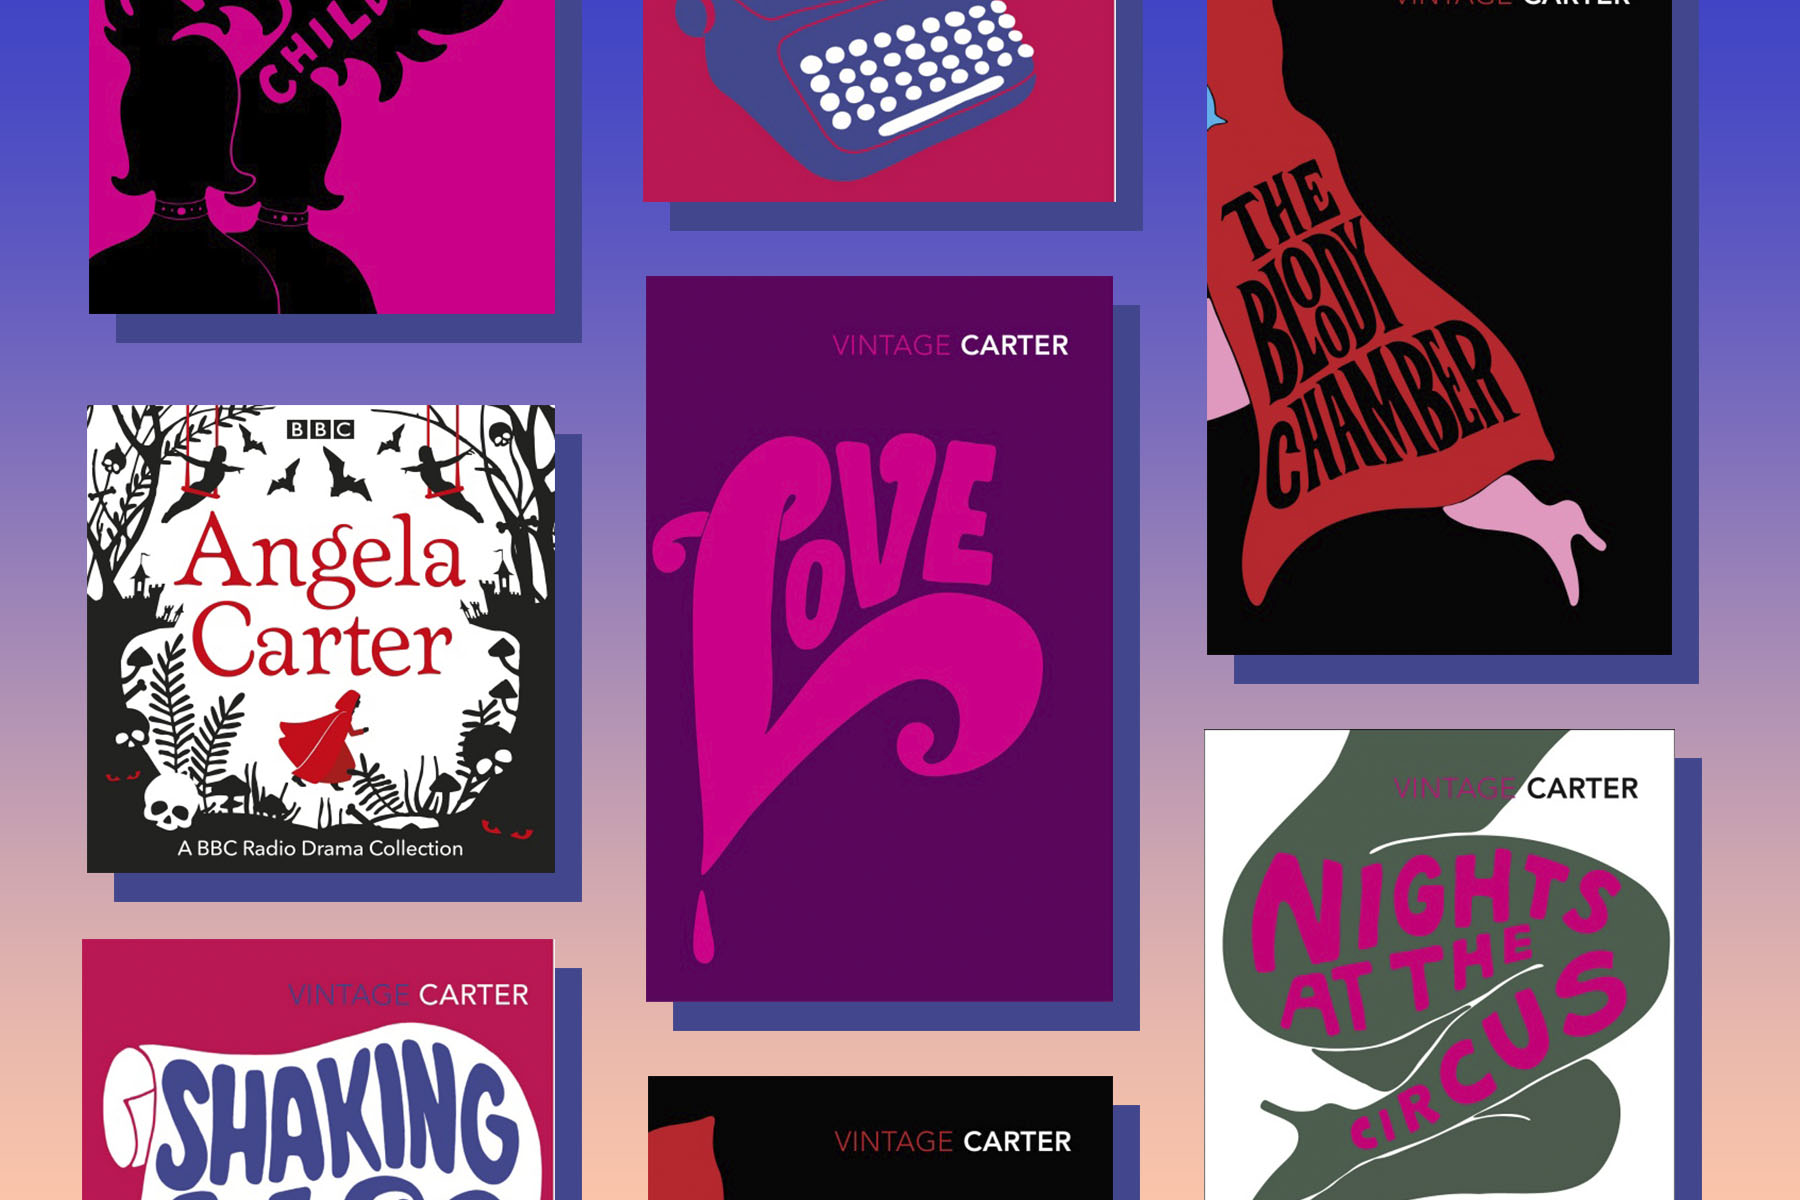 An image of book covers from author Angela Carter